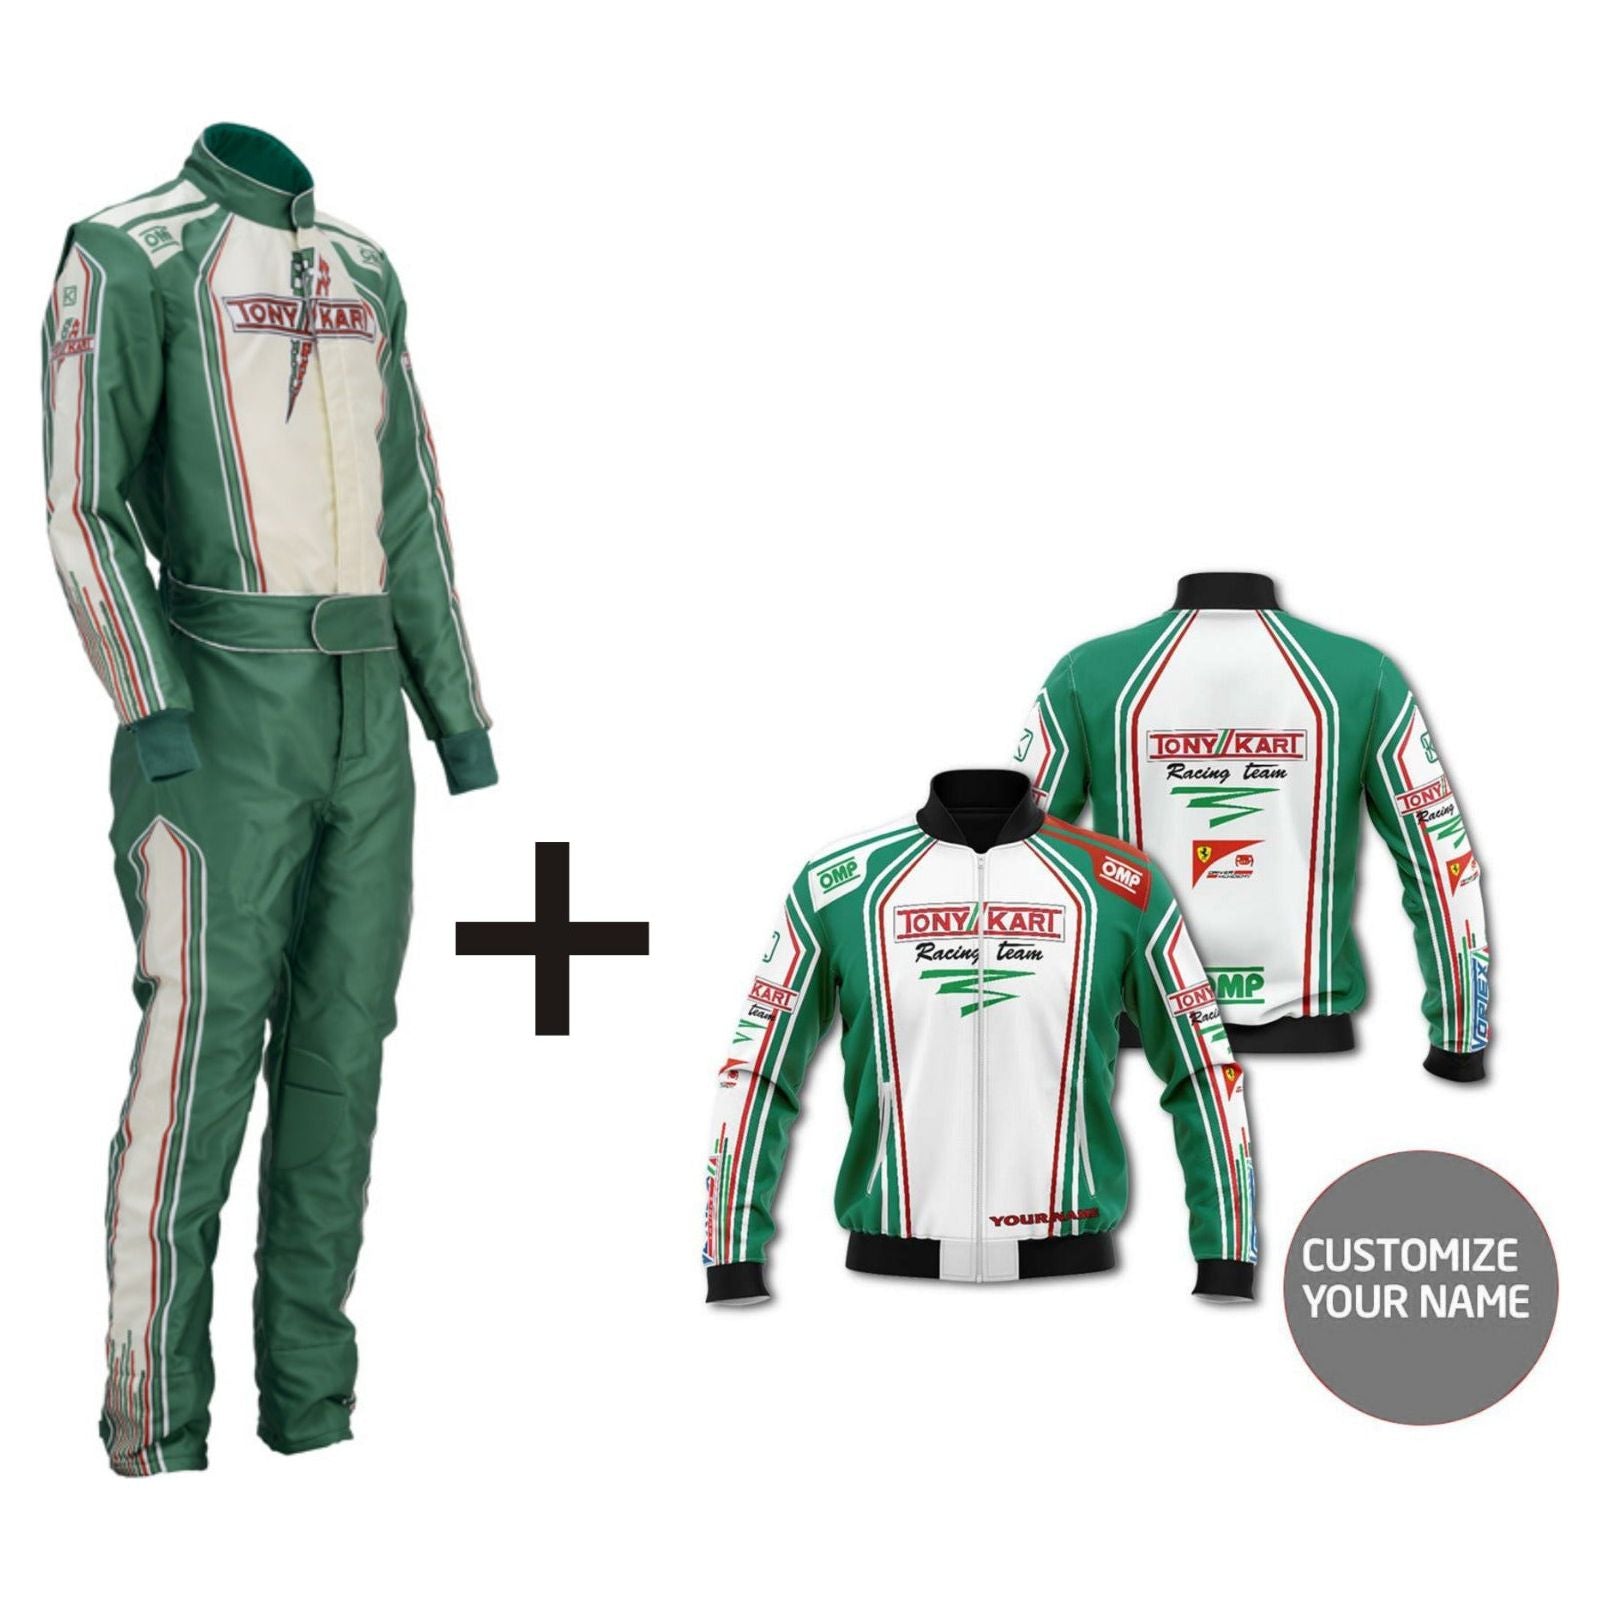 Go kart racing Sublimation Protective clothing Racing gear Suit With  Soft Shell Jacket With Digital Sublimation (All Sizes)-09